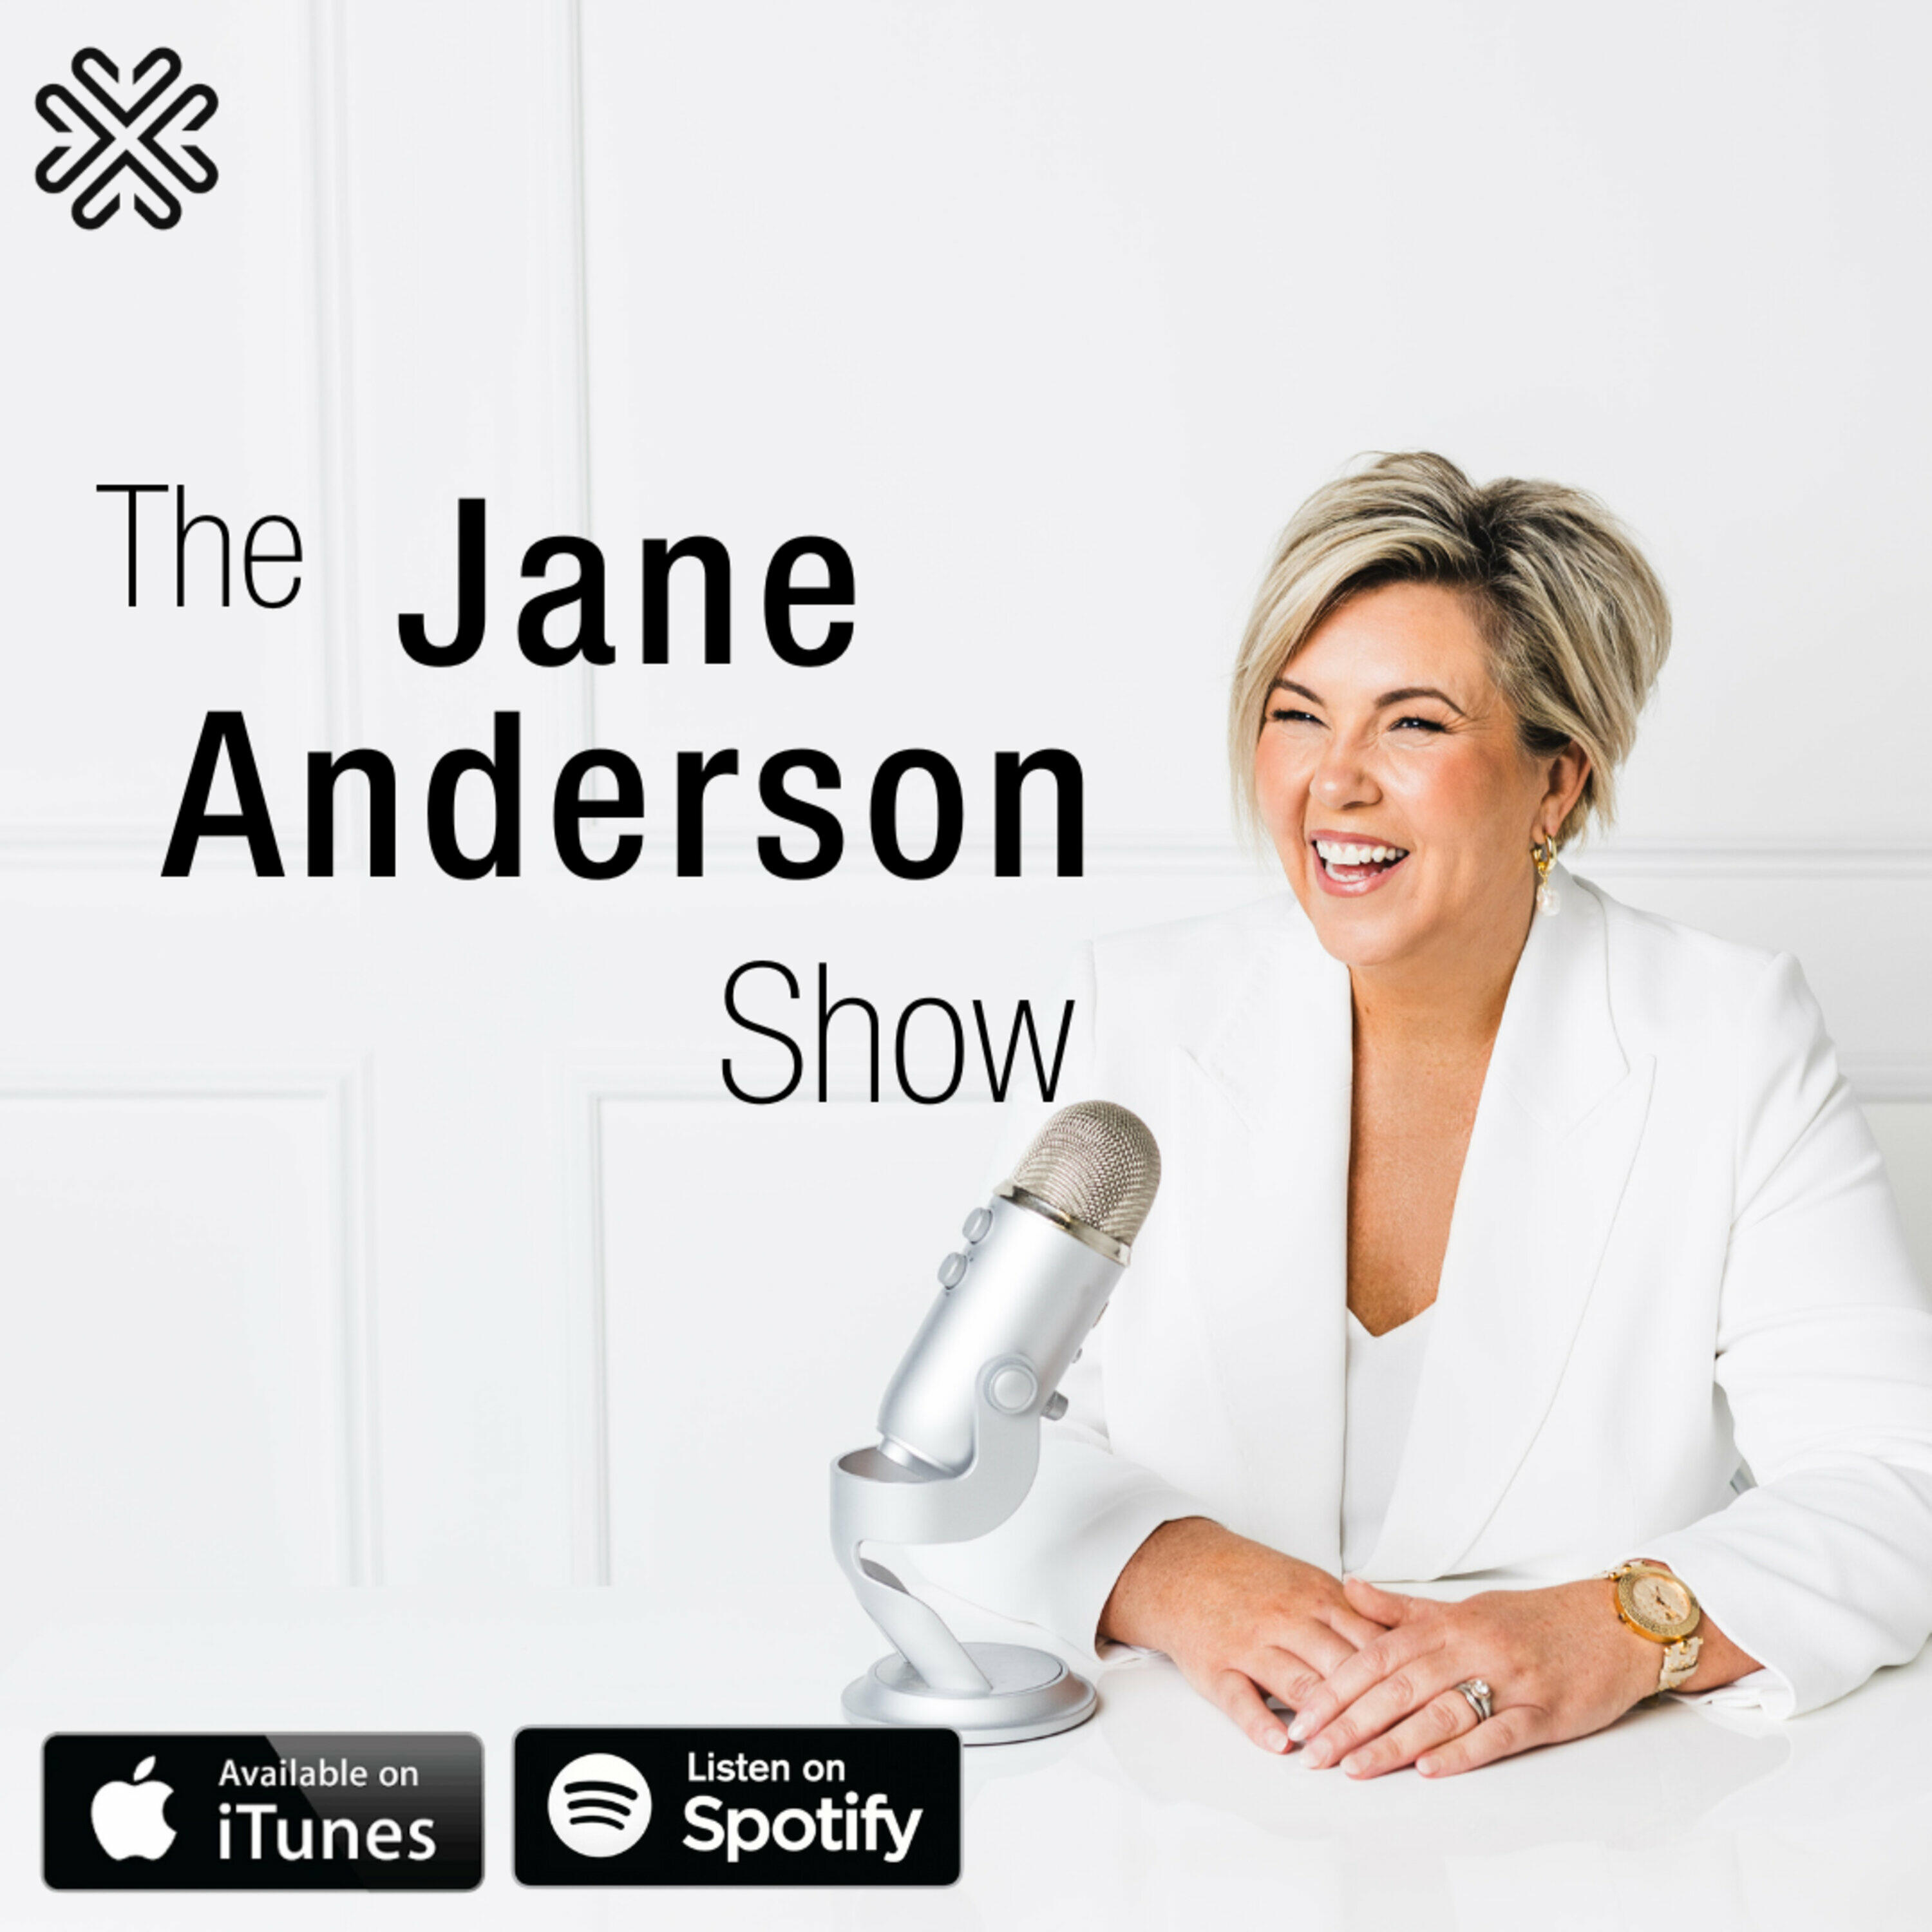 Jane Anderson Show Podcast | iHeart